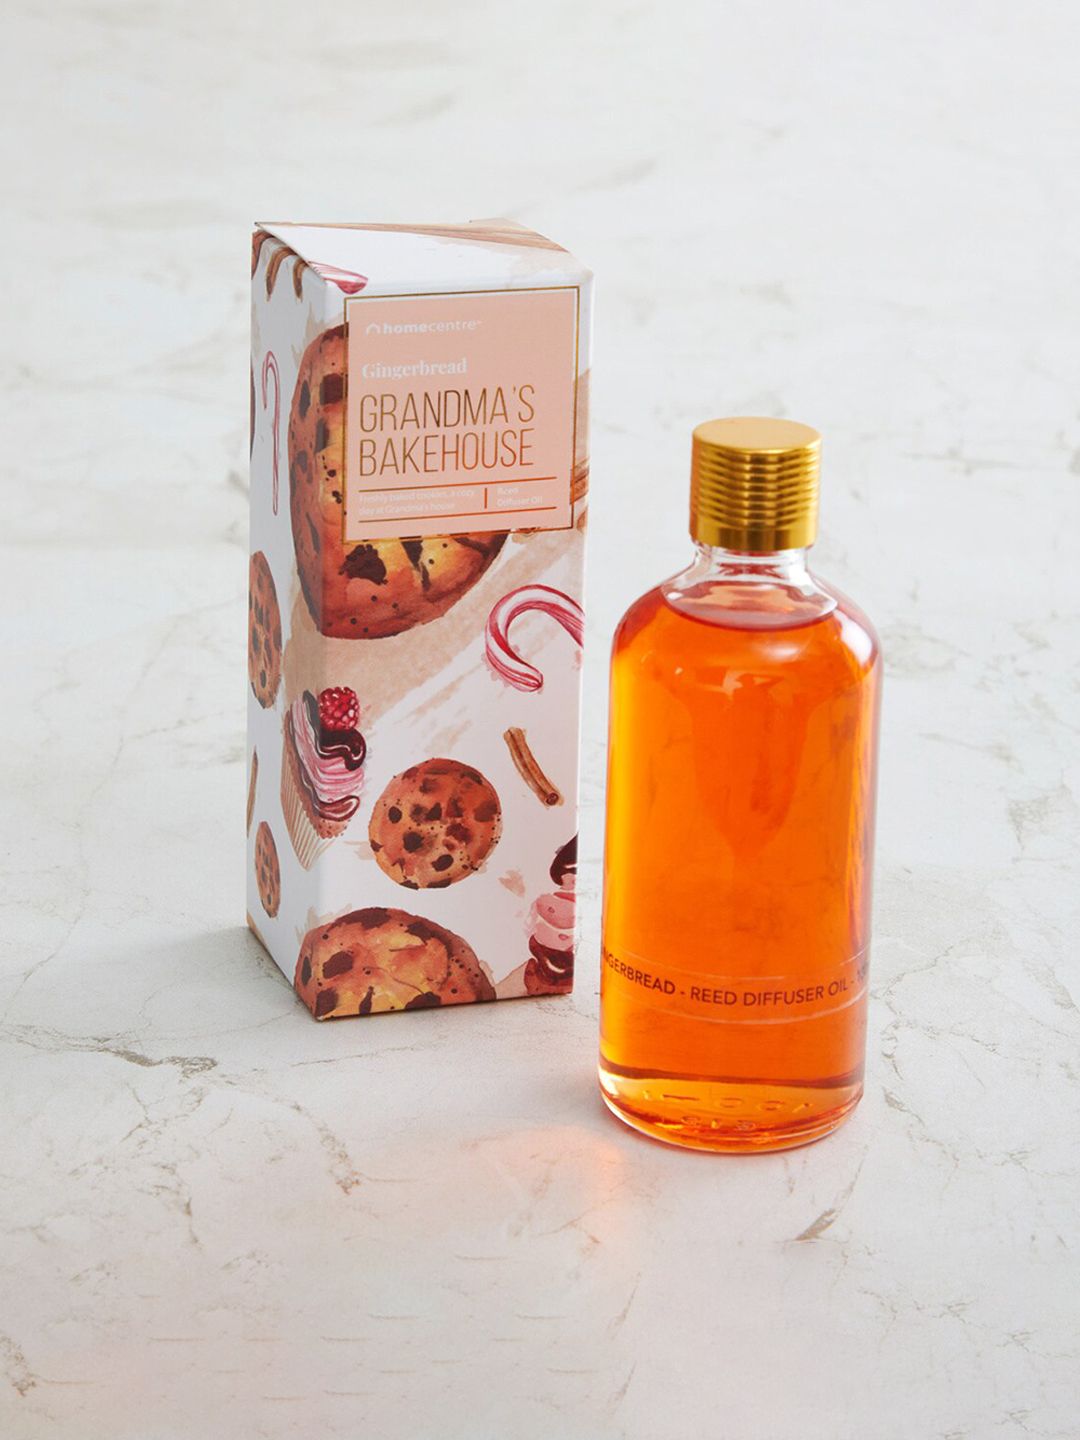 Home Centre Peach Grandma's Bakehouse Redolence Reed Diffuser Oil Price in India